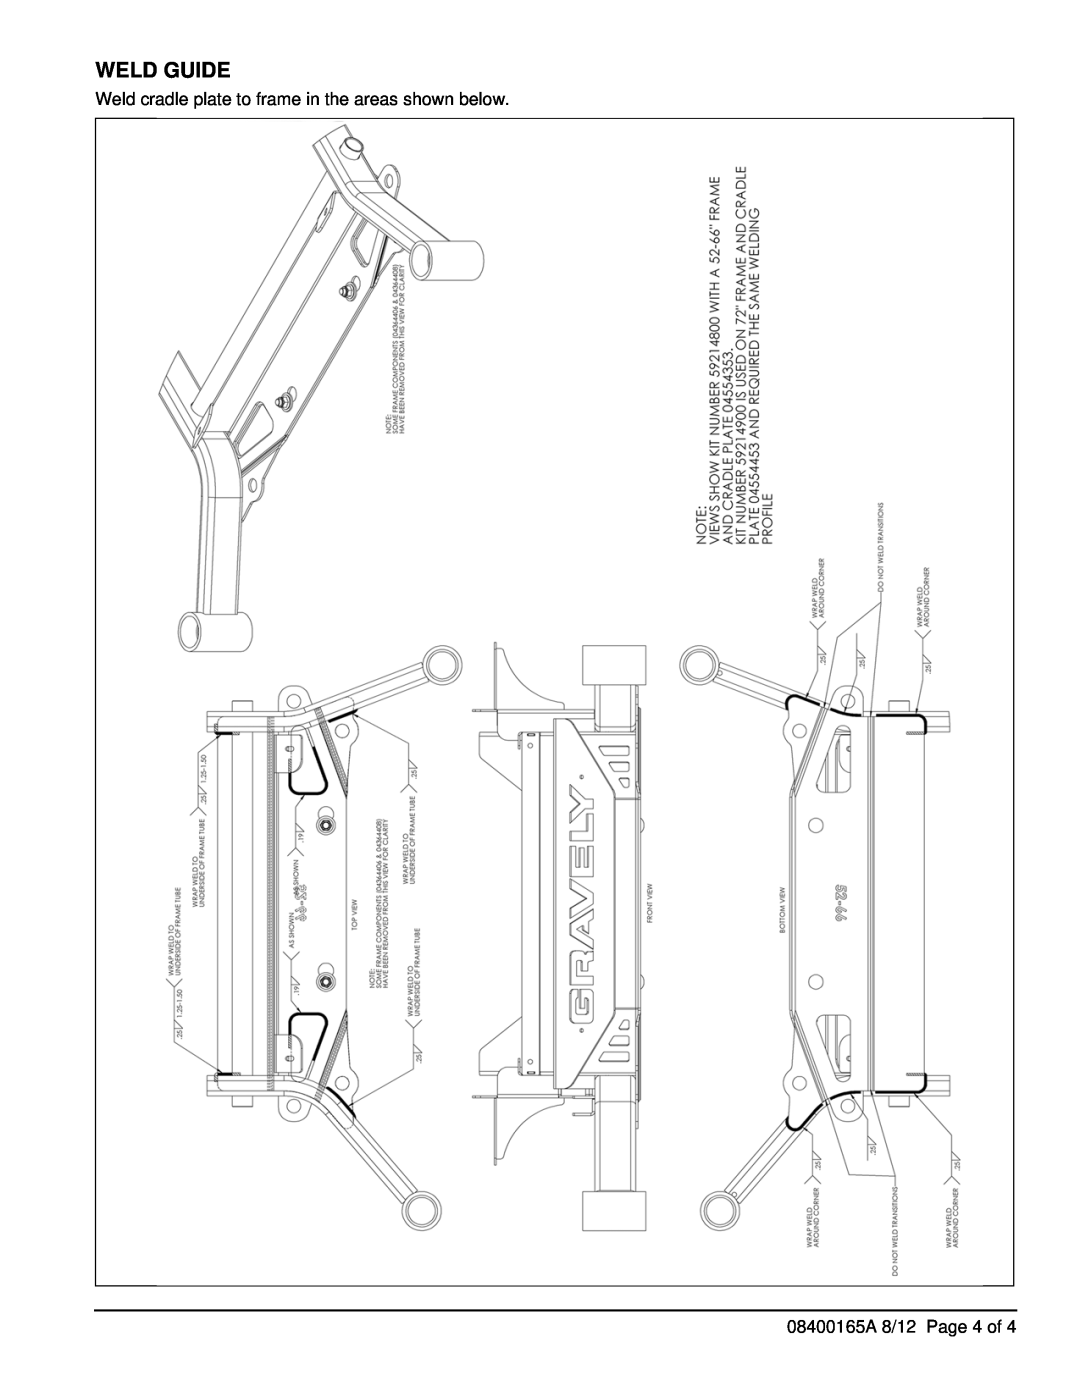 Ariens 992233, 992238, 992231, 992235, 992232, 992230, 992239 installation instructions Weld Guide, 08400165A 8/12 